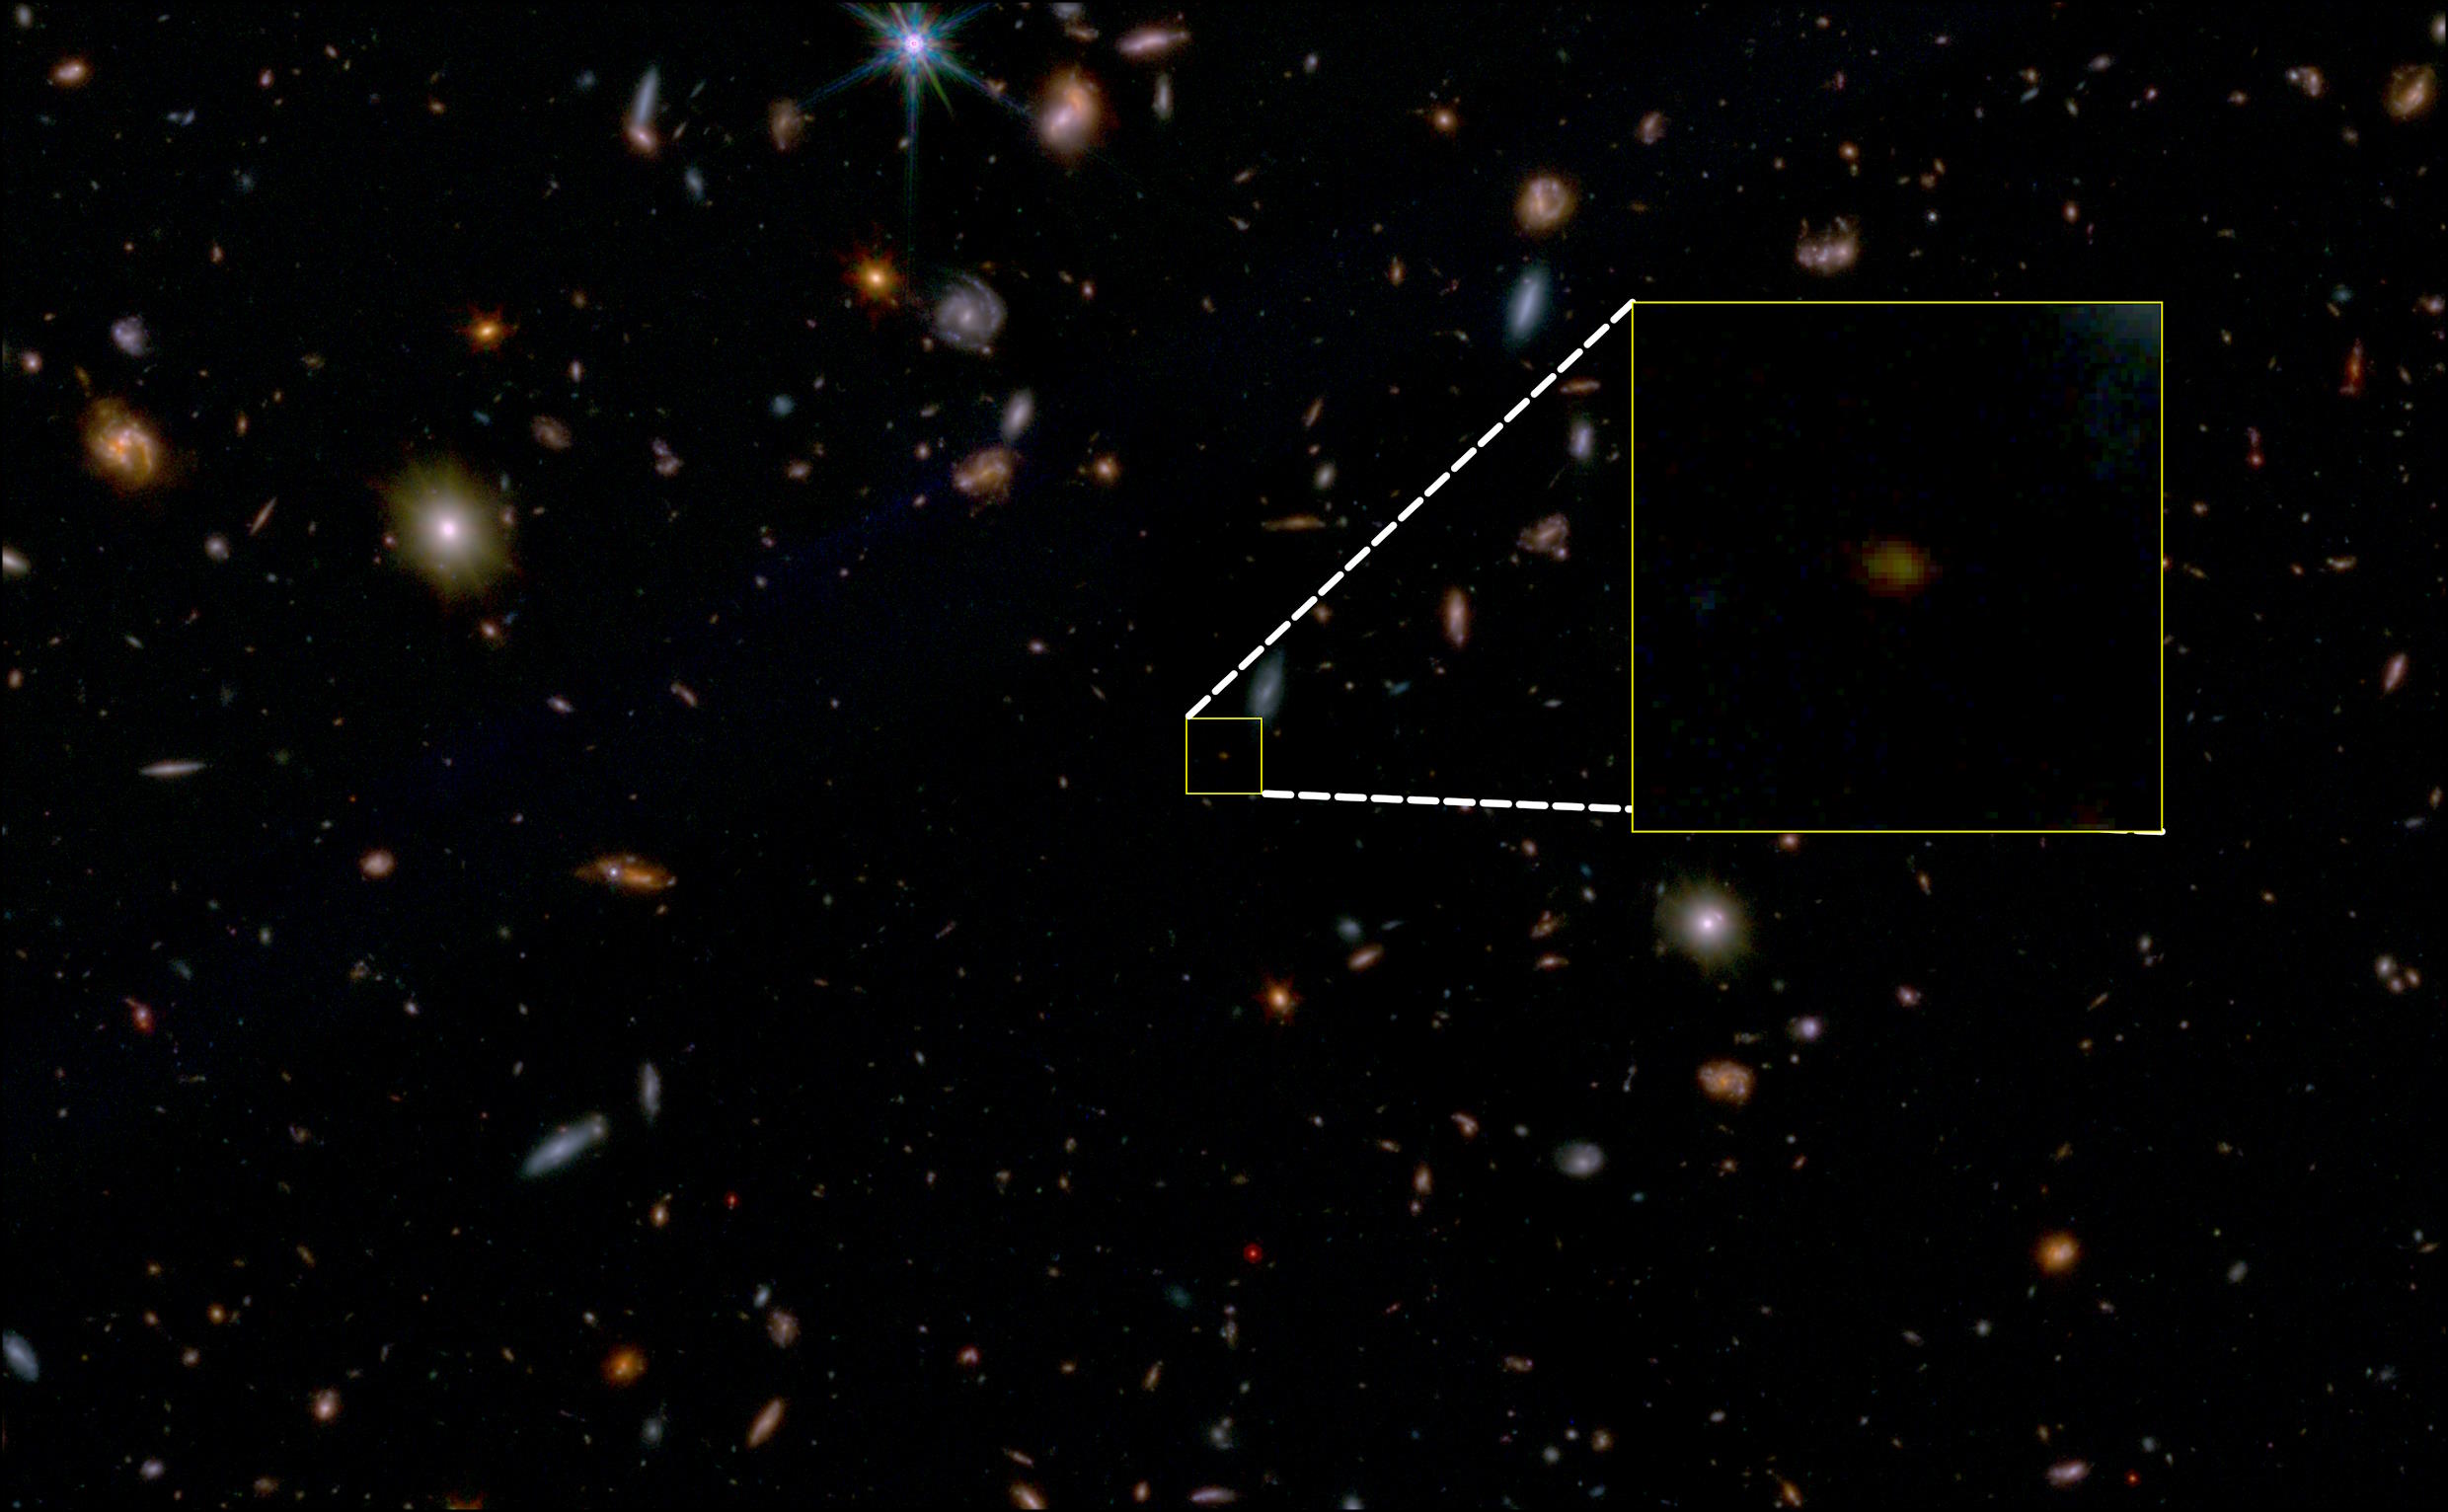 An image of a dead galaxy with a small square in the middle, captured by JWST.